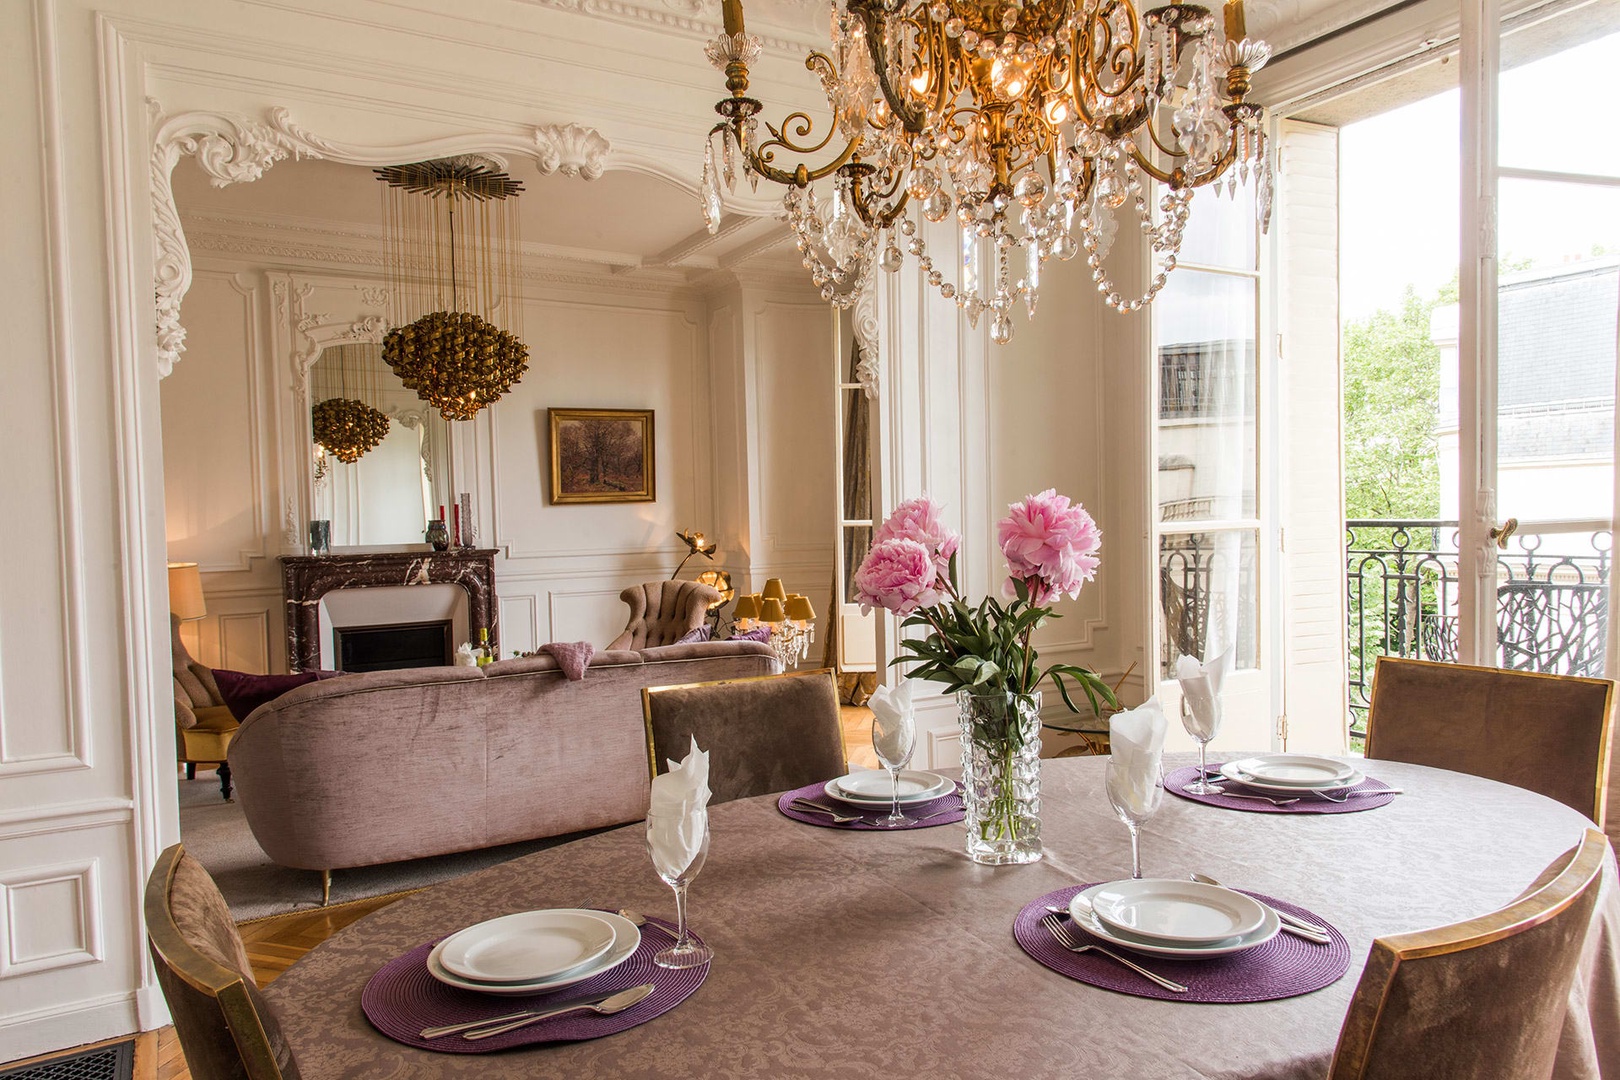 Enjoy dinner at home in this elegant space that rival any restaurant.